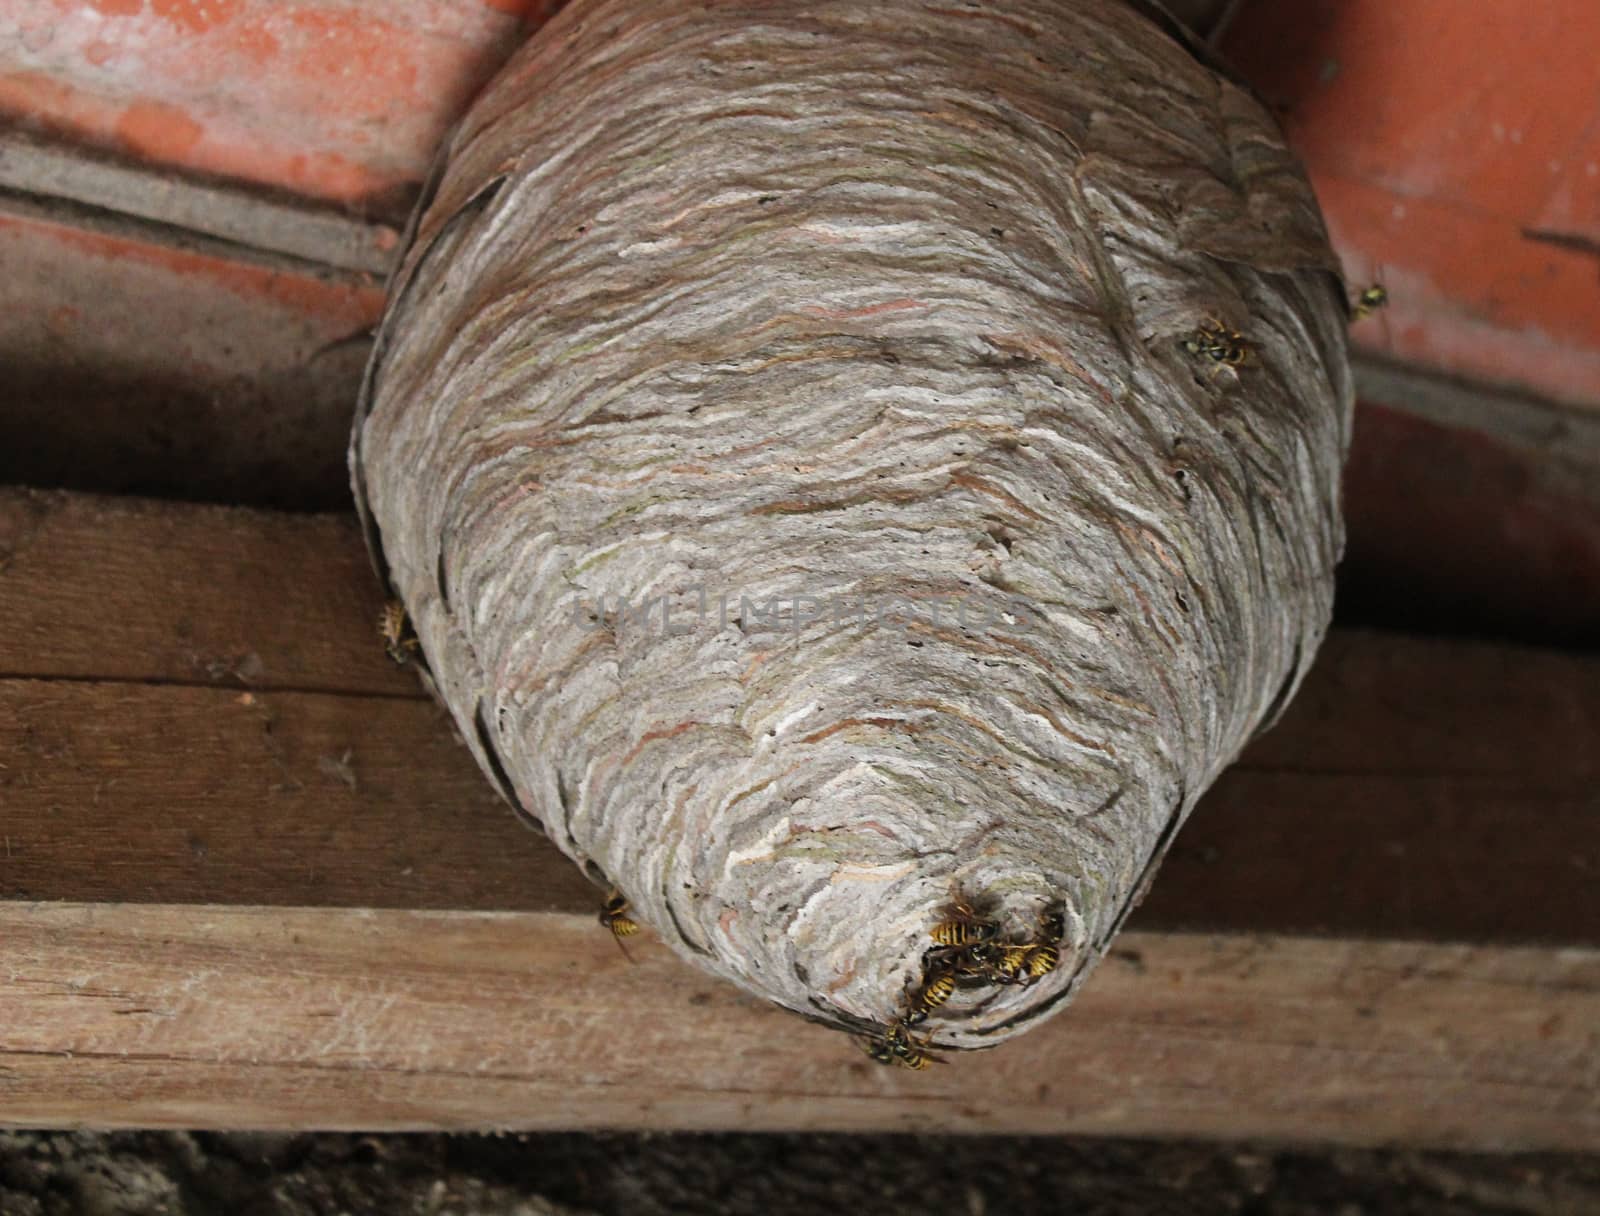 wasps nest and wasps on the ceiling by martina_unbehauen